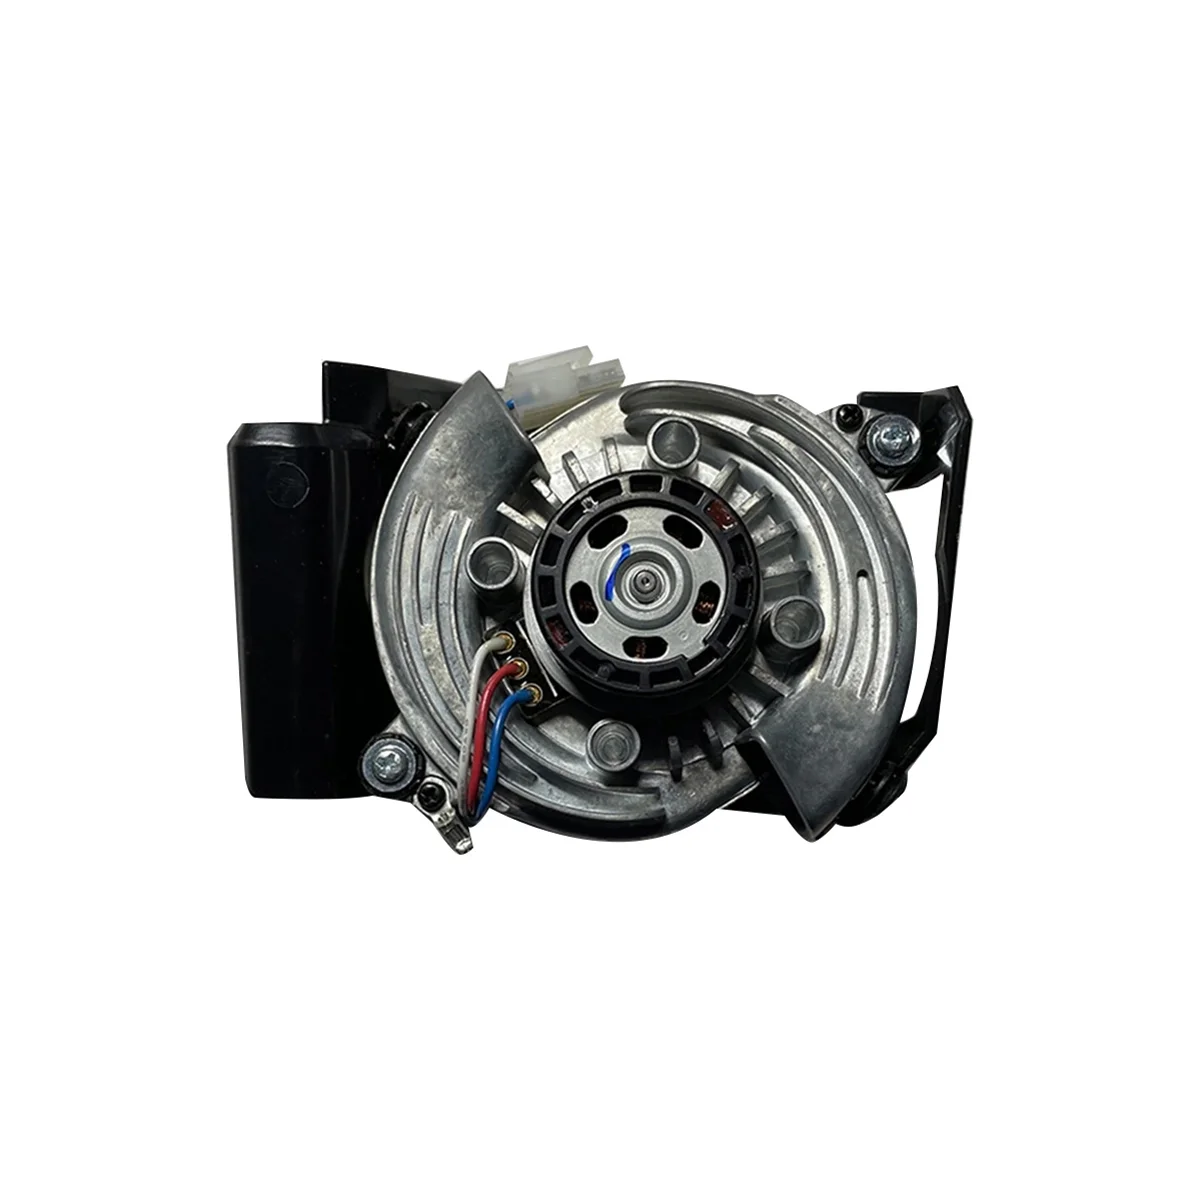 

Replacement Fan Motor Brand New Cooling Fan Motor for IROBOT S9 Robot Vacuum Cleaner Accessories